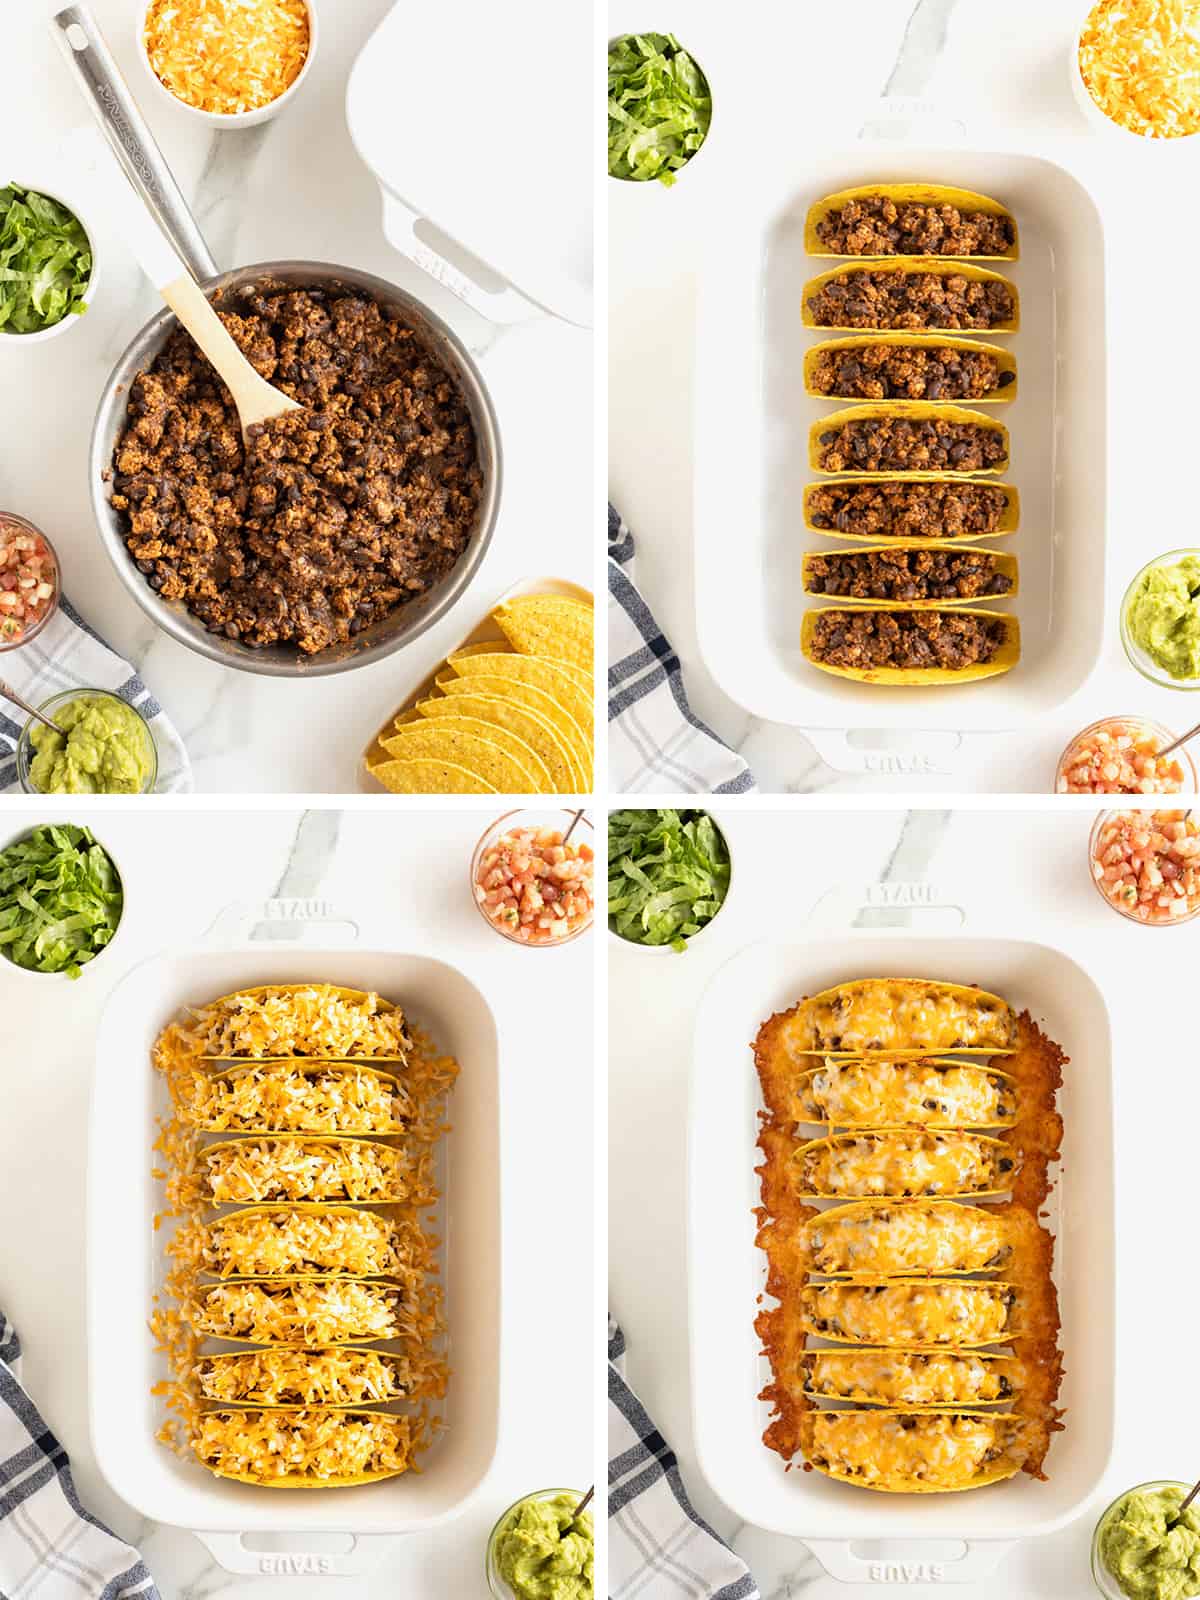 Steps to make turkey and black bean baked tacos.